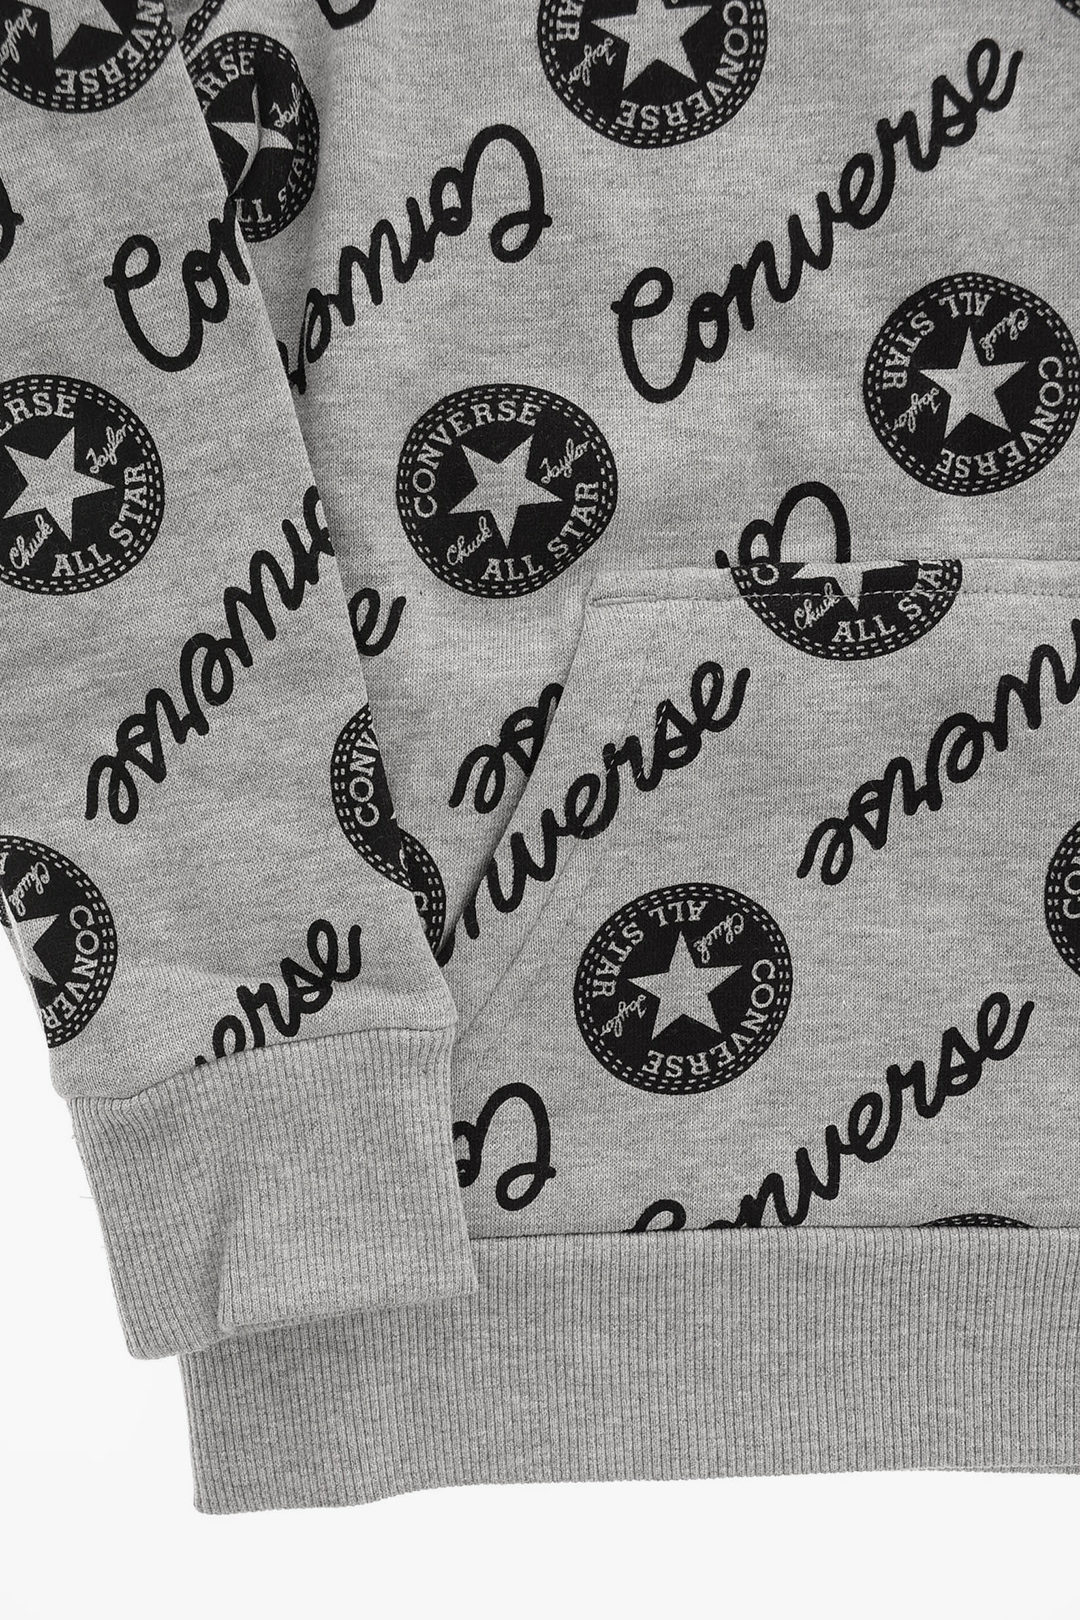 Converse KIDS Hood Glamood All ALL STAR with Outlet Over boys Sweatshirt Logo 